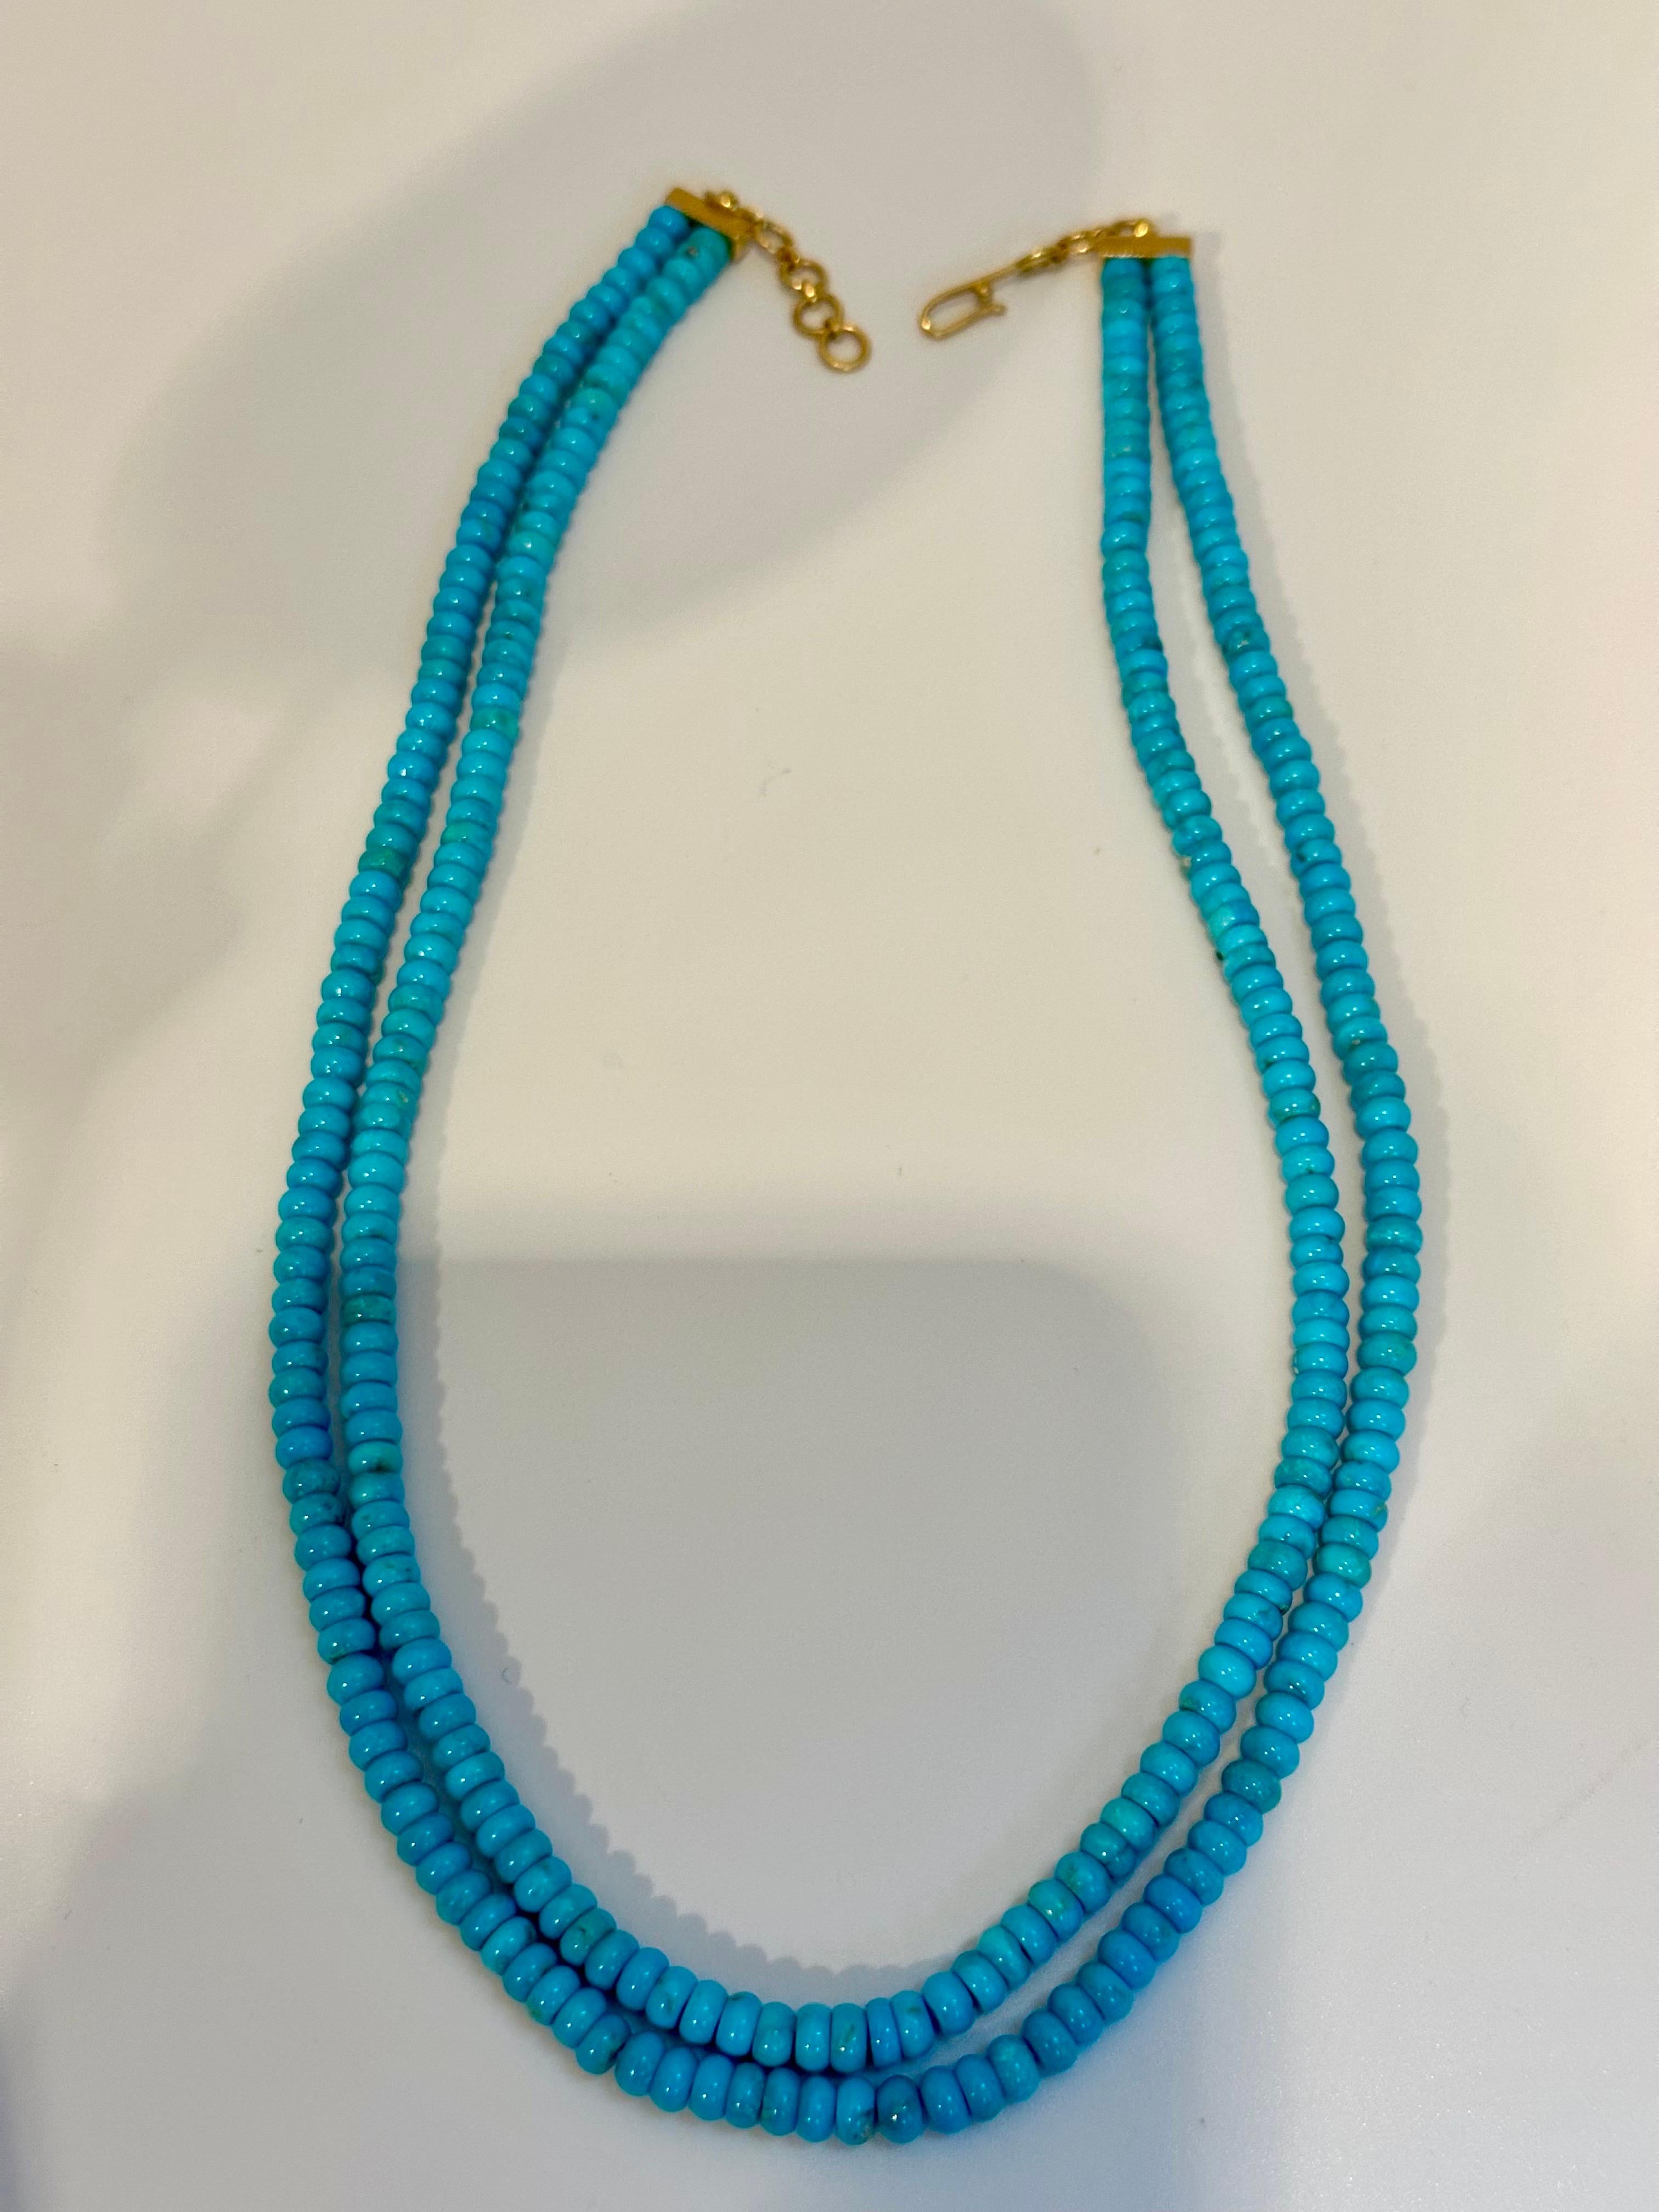 215 Carat Natural Sleeping Beauty Turquoise Necklace, Two Strand 14 Karat Gold For Sale 2